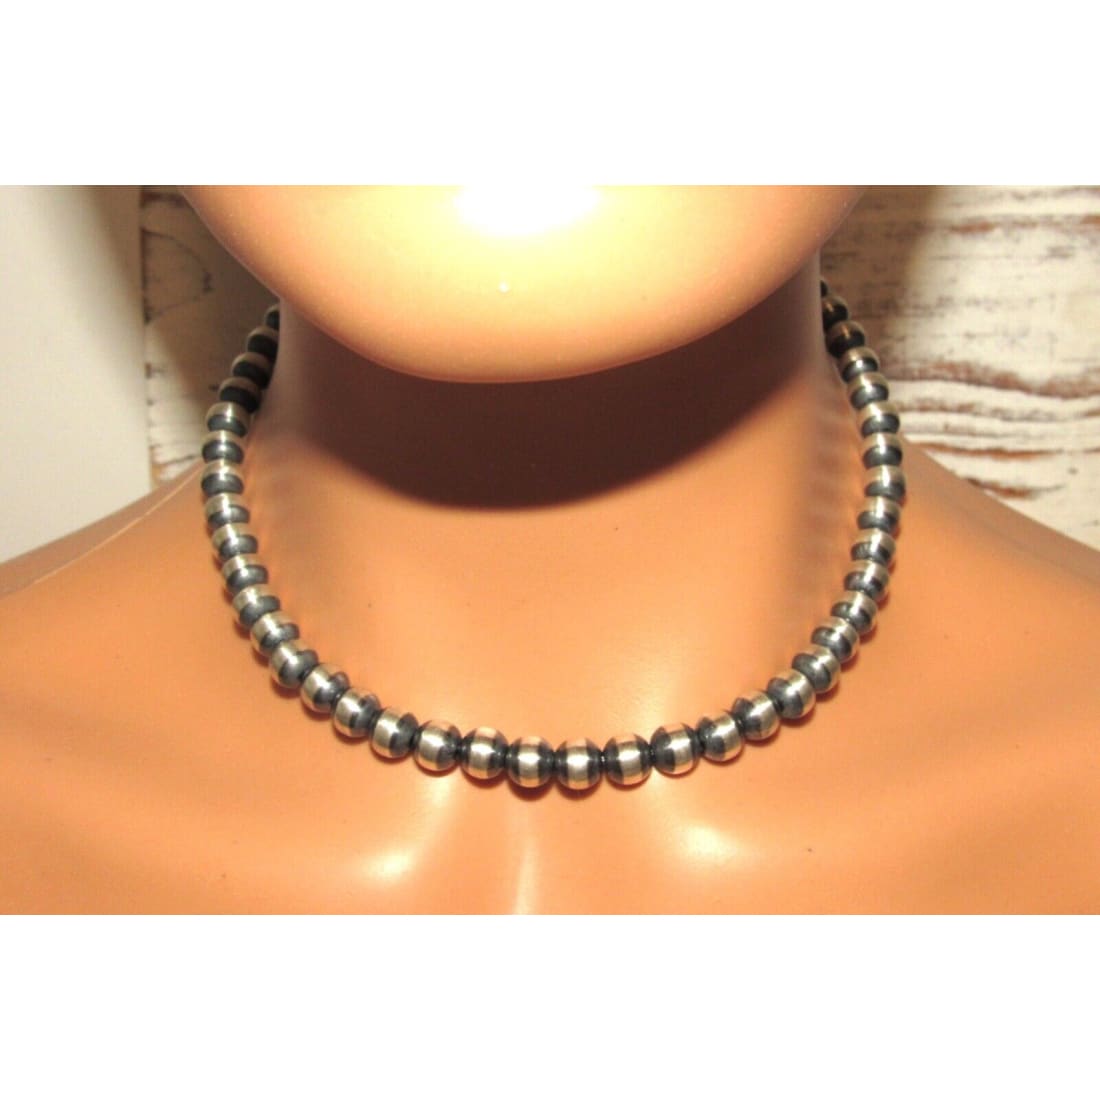 8mm Navajo Pearls Necklace Sterling Silver Choker Necklace